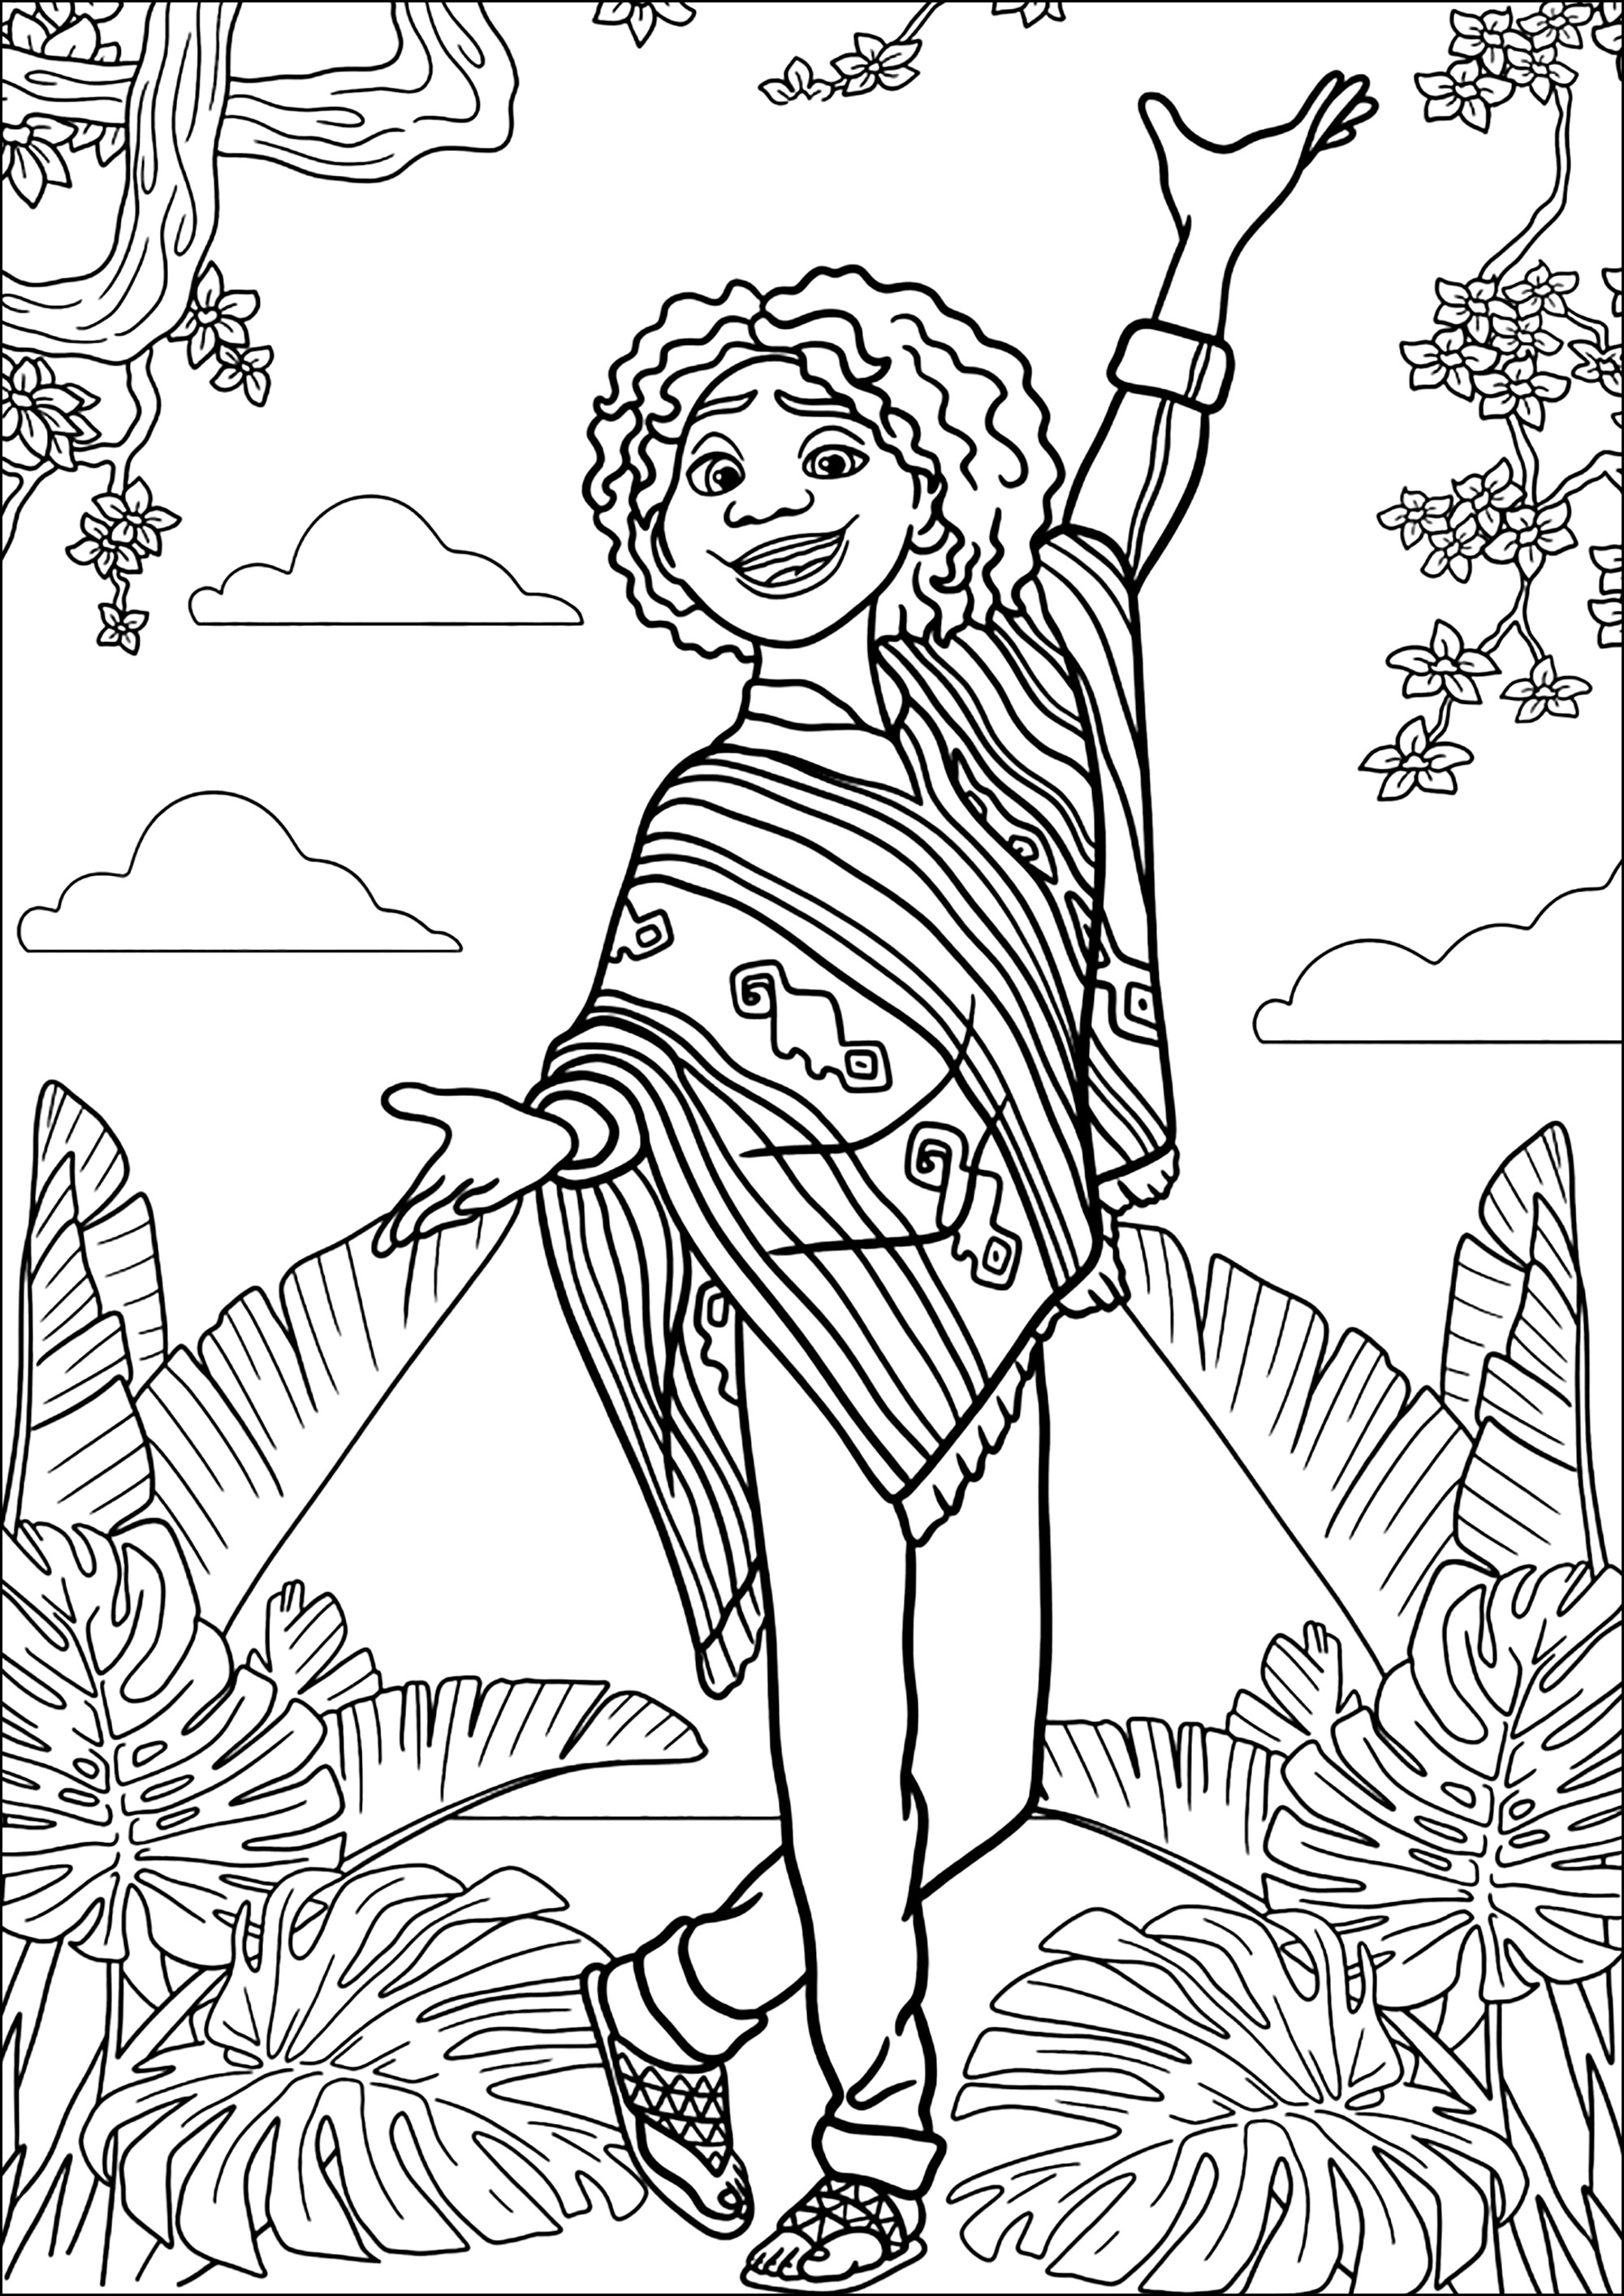 Encanto coloring page: Mirabel Madrigal in the Colombian jungle - Encanto  Kids Coloring Pages